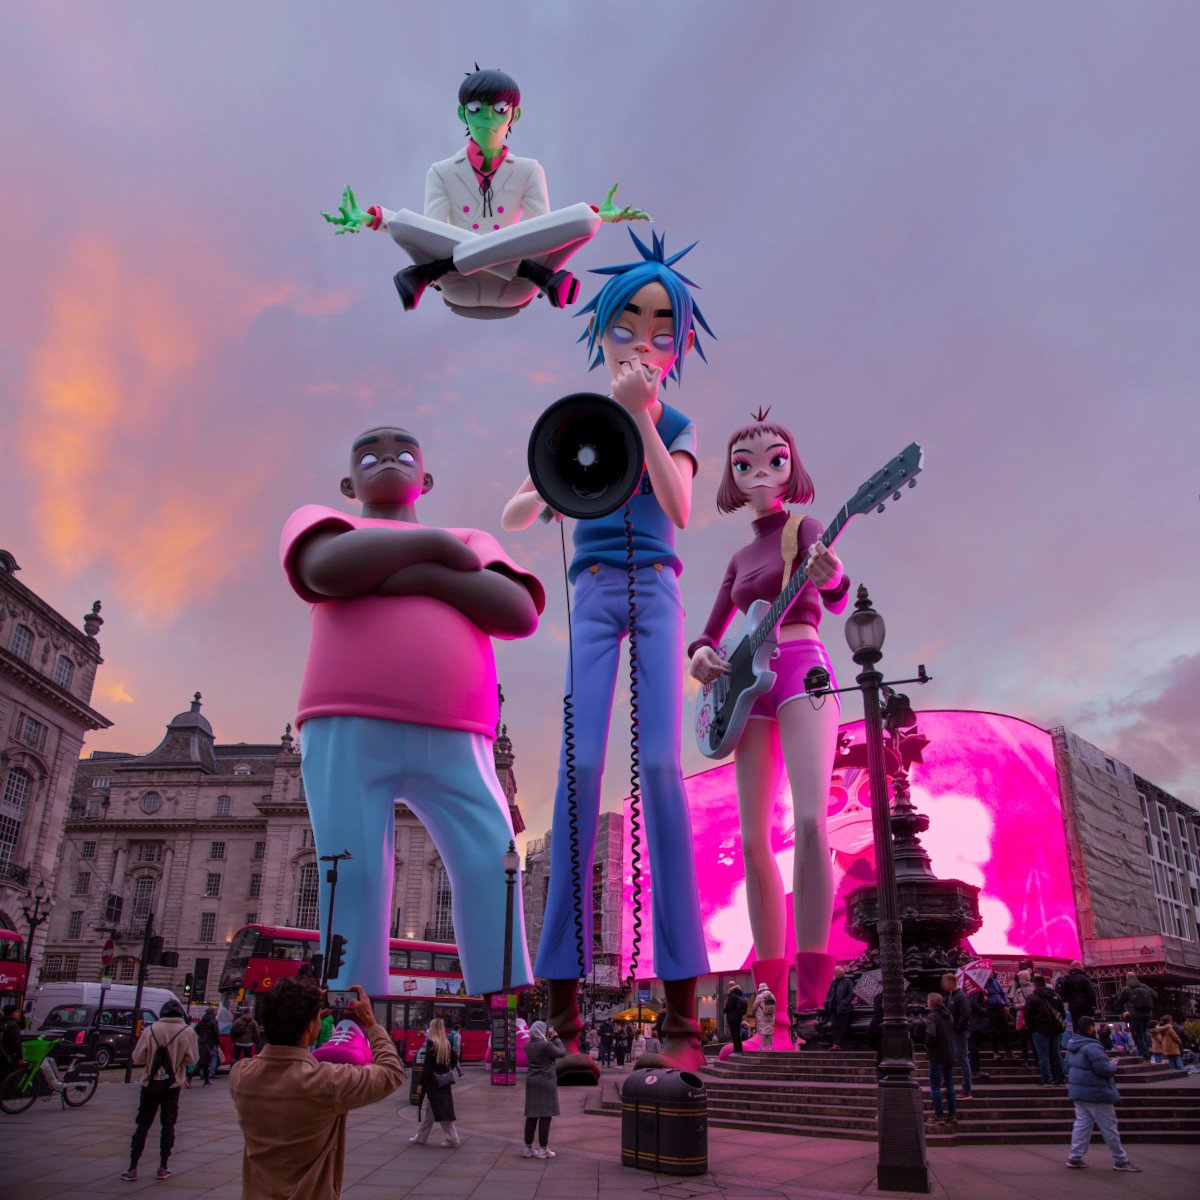 Die virtuelle Band Gorillaz in AR am Piccadilly Circus (Foto: Ocean Outdoor)